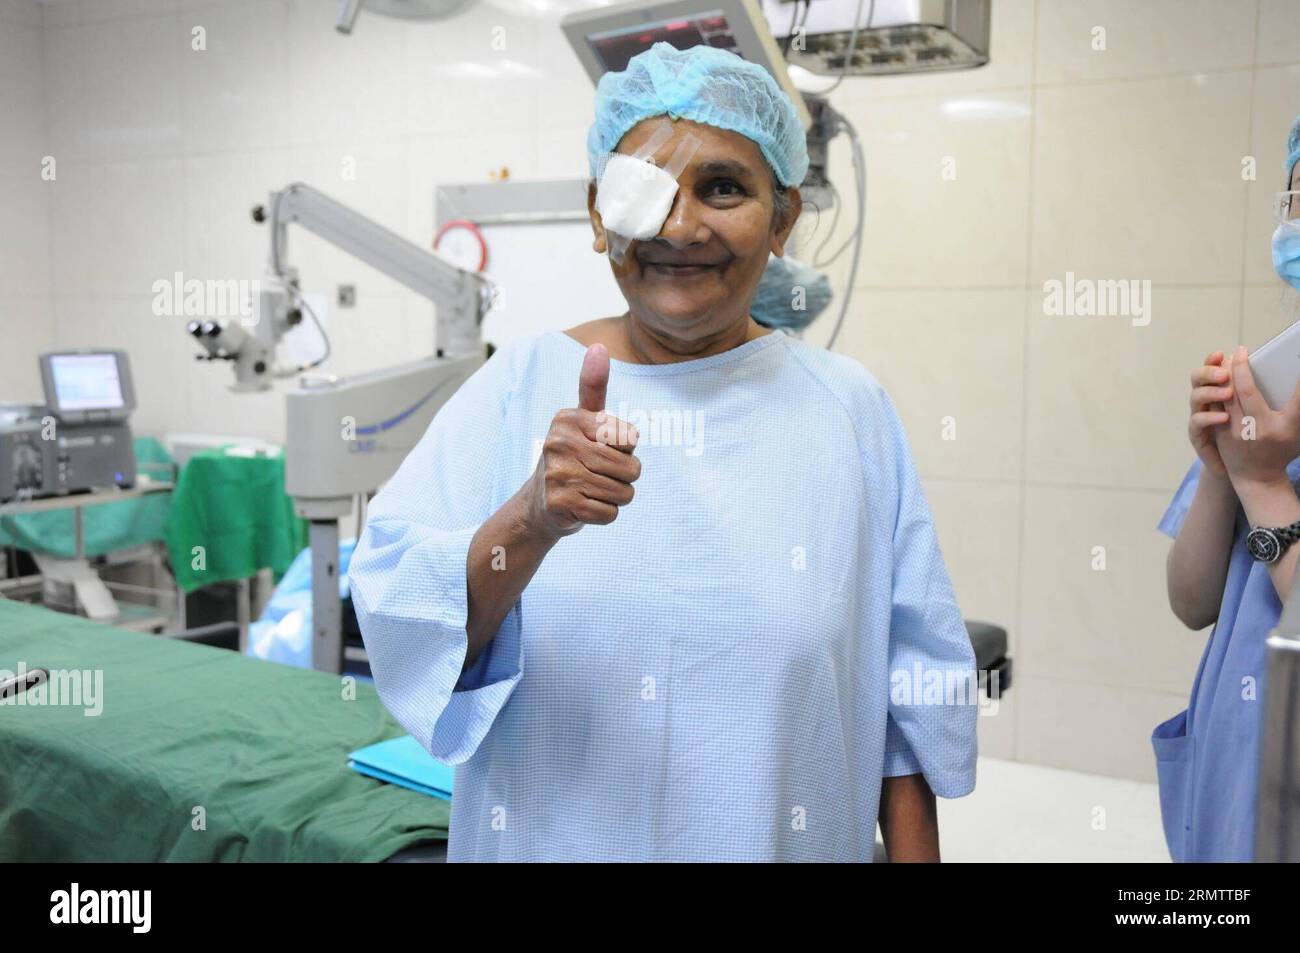 (140919) -- COLOMBO, Sept. 19, 2014 -- A patient thumbs up after a free cataract surgery in Colombo, Sri Lanka, Sept. 11, 2014. Tribute to Love , a China-Sri Lanka free cataract surgery campaign started on Sept. 11 in Colombo, aiming to help 1000 cataract patients. ) (yc) SRI LANKA-COLOMBO-FREE CATARACT SURGERY CAMPAIGN YangxMeiju PUBLICATIONxNOTxINxCHN   Colombo Sept 19 2014 a Patient Thumbs up After a Free Cataract Surgery in Colombo Sri Lanka Sept 11 2014 Tribute to Love a China Sri Lanka Free Cataract Surgery Campaign started ON Sept 11 in Colombo aiming to Help 1000 Cataract Patients  Sri Stock Photo